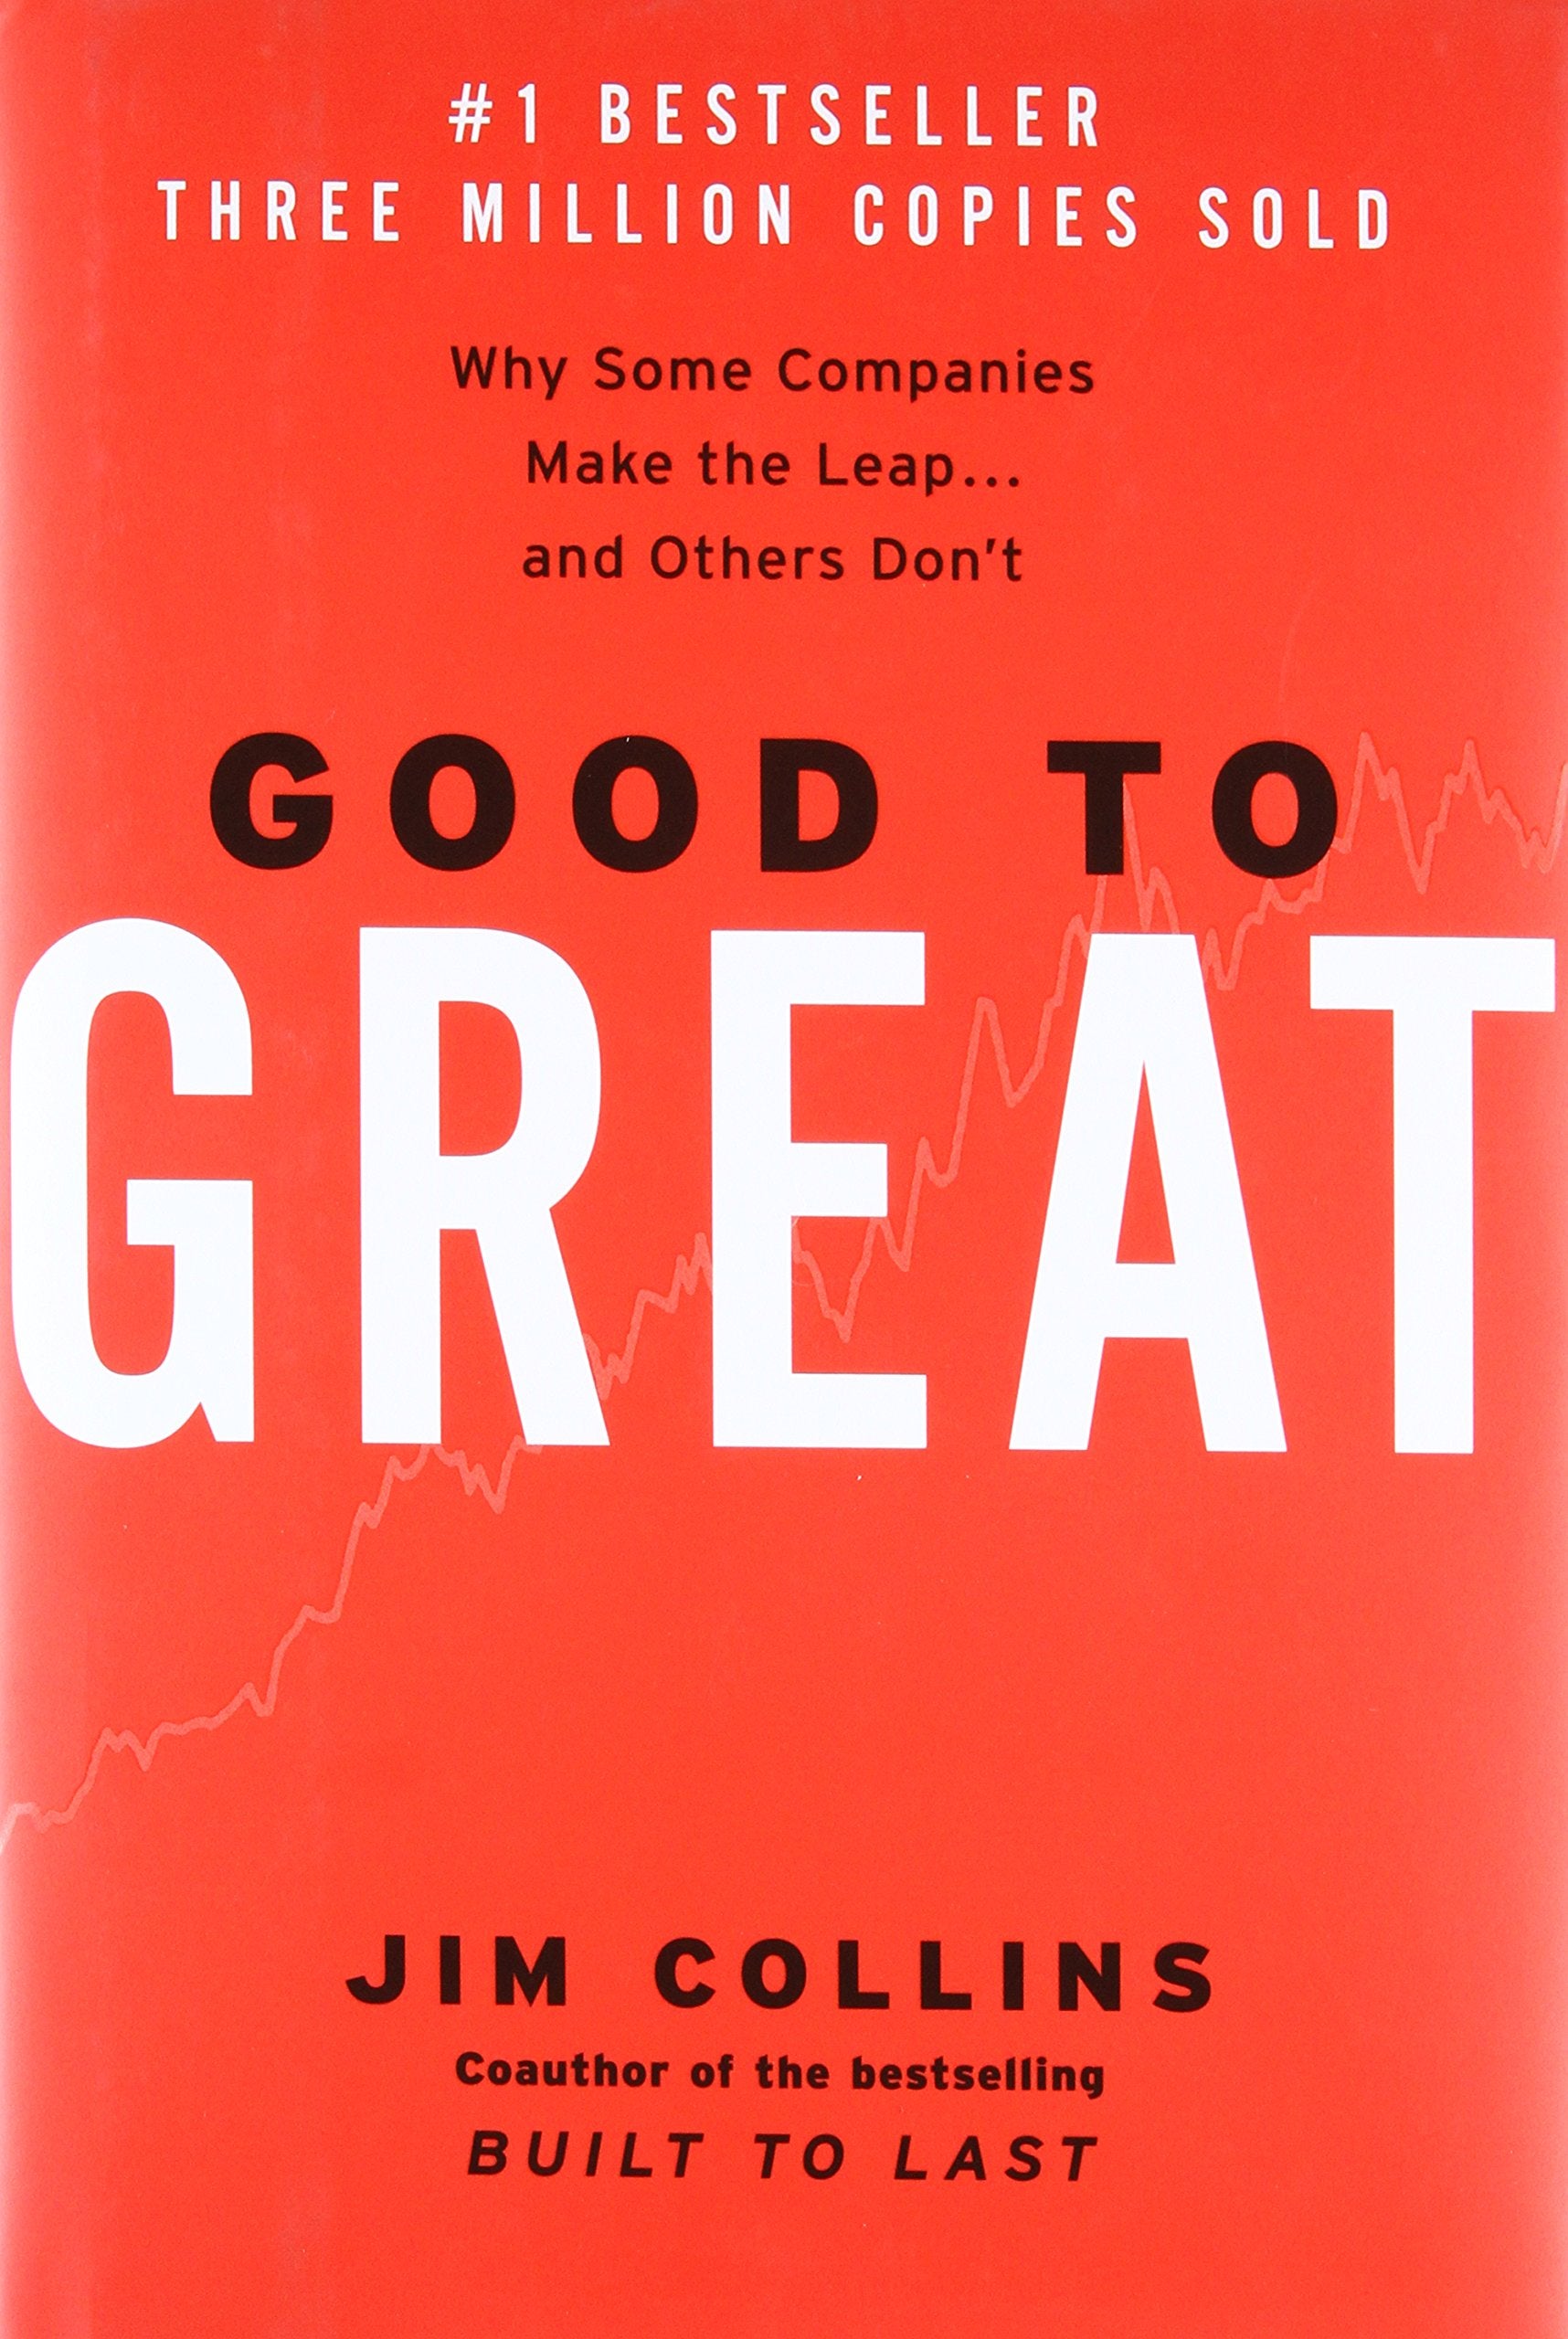 Livre ISBN 66620996 Good To Great: Why Some Companies Make the Leap...And Others Don't (Jim Collins)